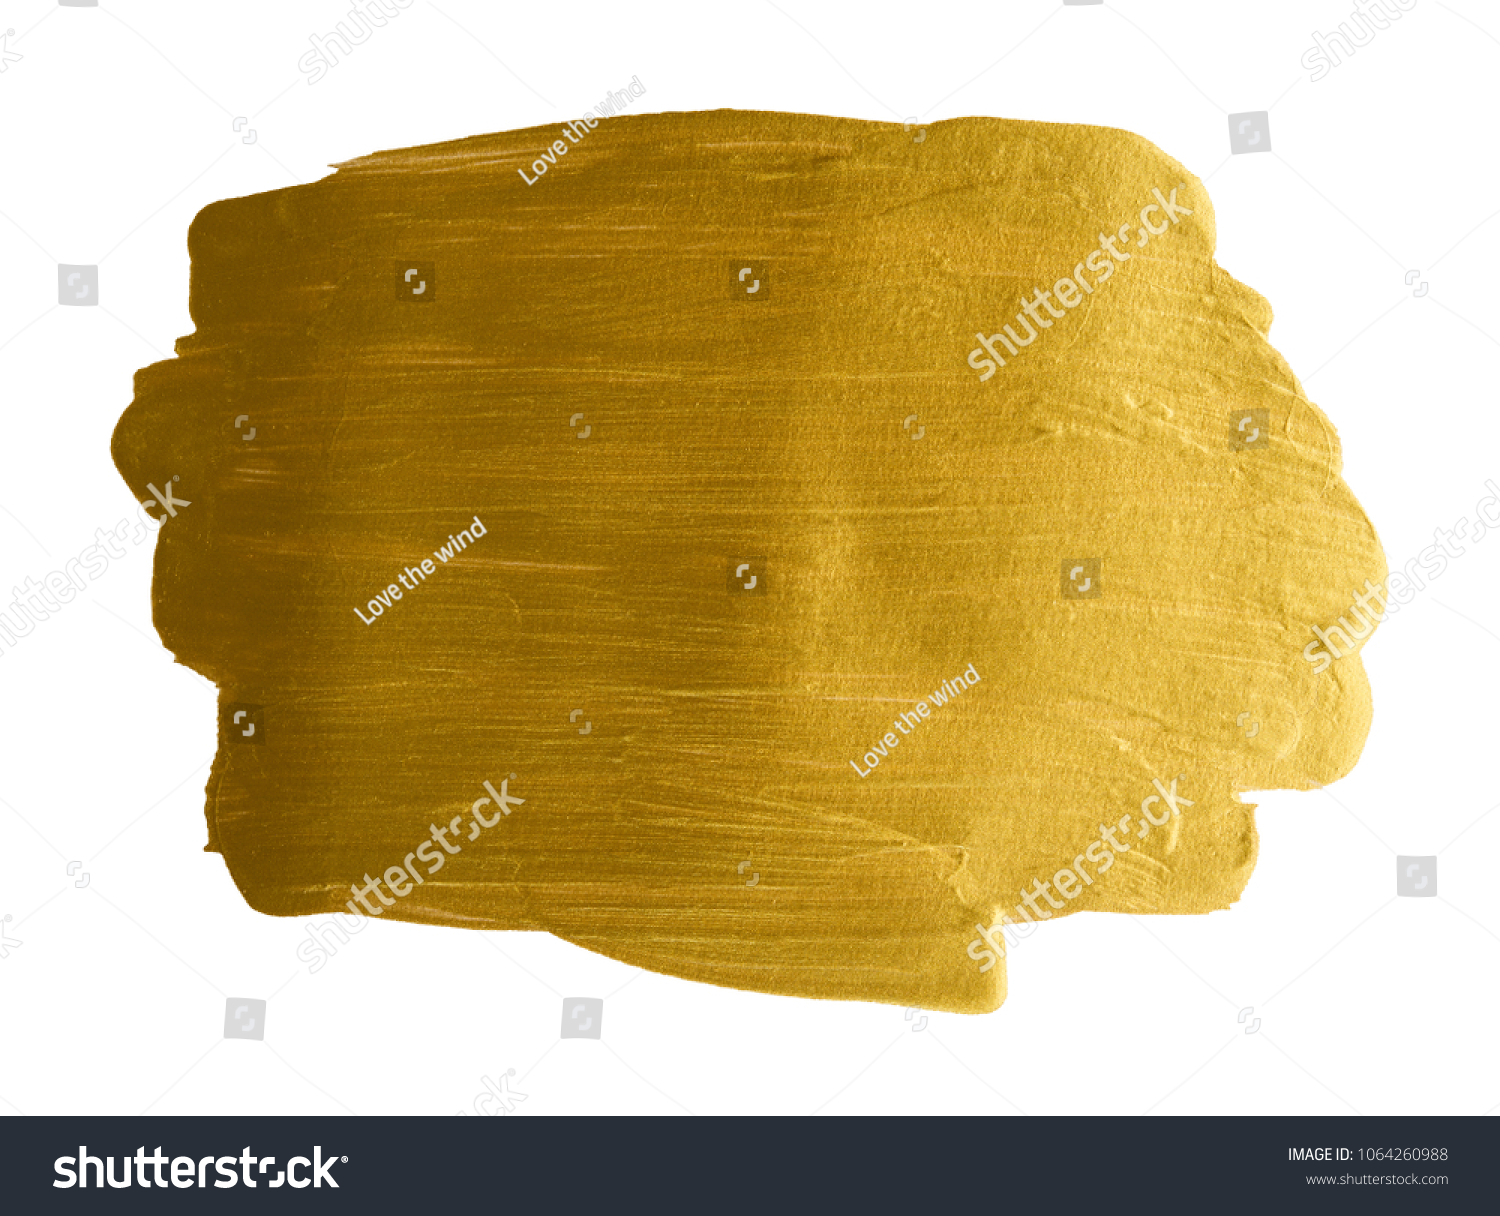 Gold acrylic watercolor paint brush stroke free hand drawing texture isolated on white background top view photo object design #1064260988